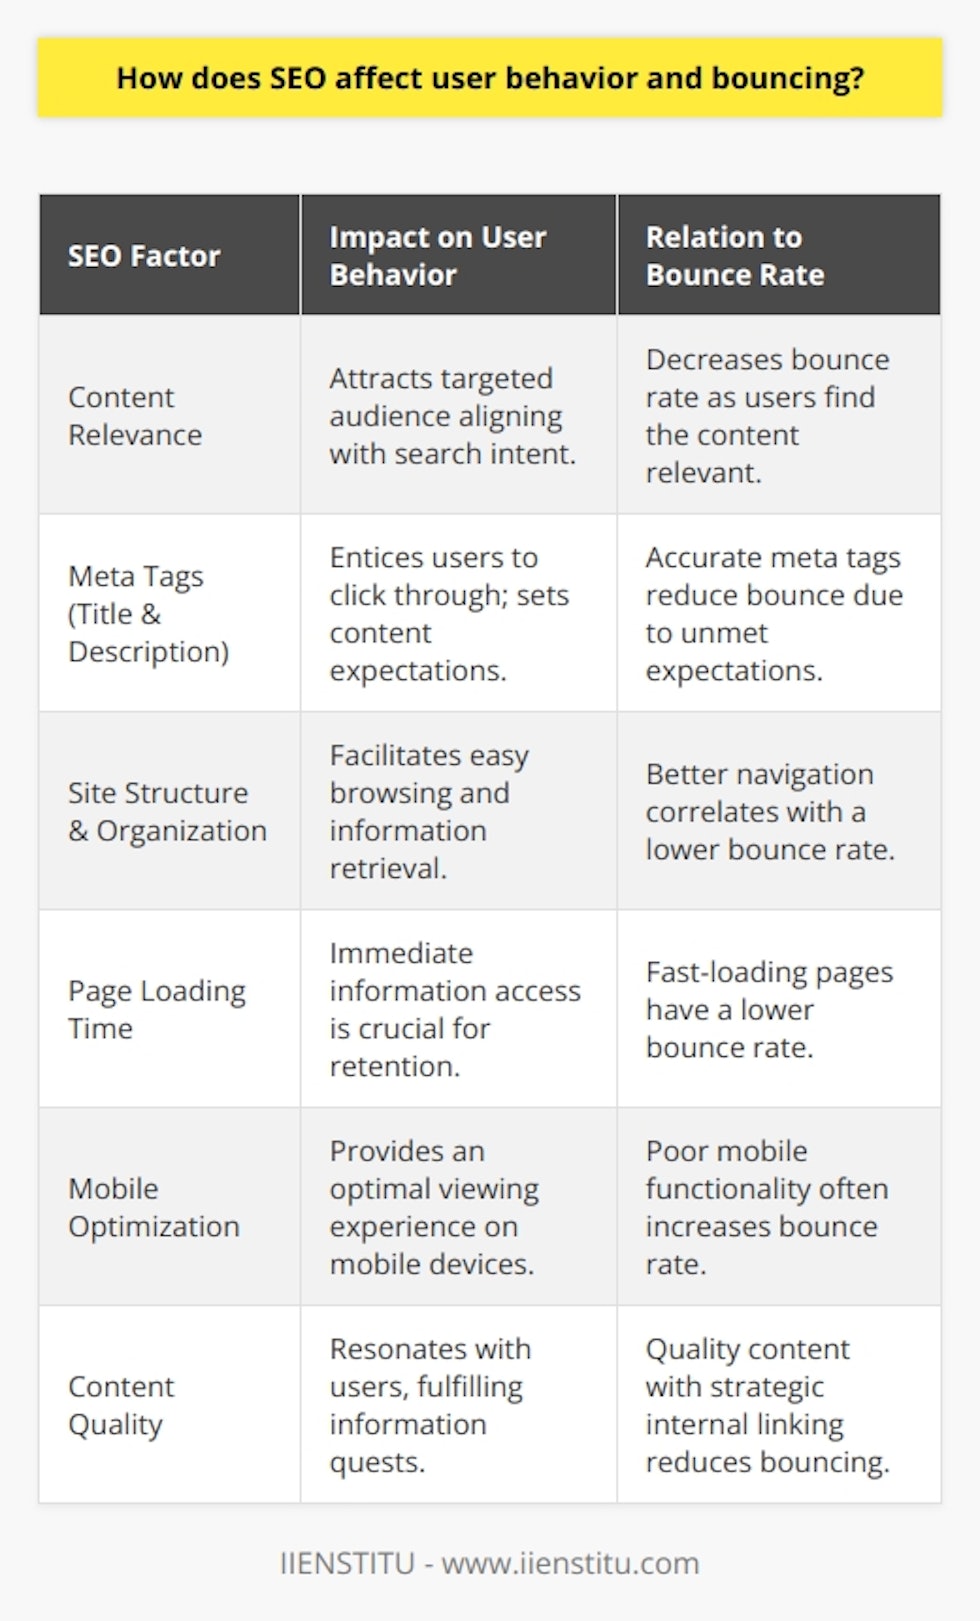 Search engine optimization (SEO) profoundly influences user behavior and their propensity to bounce from a website. Bounce rate is a metric that indicates the percentage of visitors who enter a site and then leave (bounce) rather than continuing to view other pages within the same site. Understanding the interplay between SEO and user behavior is vital for any digital marketer or website owner looking to cultivate a satisfying online experience and retain visitors.Firstly, the relevance of content plays an integral role in SEO and user behavior. By meticulously researching and incorporating keywords that align with the user's search intent, websites increase their visibility in search engine results pages (SERPs) and attract a more targeted audience. Users who find content that closely matches their queries are less likely to bounce and more likely to spend an extended period engaging with the site.Moreover, SEO extends beyond keywords to include meta tags, like title and description tags. These elements provide snapshots of the webpage's content in the SERPs. A well-crafted meta title and description can entice a user to click-through, while an accurate and concise depiction of the page's content reduces the likelihood of a bounce due to unmet expectations.A lesser-known SEO element that impacts user behavior is the site's structure and organization. A logical hierarchy and clear navigation facilitate easy browsing, allowing users to find information without frustration. Moreover, a well-structured website is easier for search engines to crawl and index, which can result in higher rankings and increased visibility. Users are more inclined to explore a site that is intuitively organized, which diminishes the bounce rate.Loading time is another critical factor at the intersection of SEO and user experience. Page speed is a ranking factor for Google, underscoring its importance for SEO. Pages that load swiftly satisfy the user's need for immediate information, while slow-loading pages often contribute to an increased bounce rate. Enhancing technical aspects like server response time and optimizing media files can improve both SEO performance and user retention.Additionally, mobile optimization significantly influences SEO and user behavior. With mobile searches overtaking desktop, search engines now prioritize mobile-friendly websites. A responsive design ensures an optimal viewing experience across various devices, which satisfies the modern user's expectations and reduces the likelihood of them bouncing away due to poor functionality.Content quality also plays a pivotal role in engaging users and encouraging them to delve deeper into the website. High-quality, meaningful, and updated content resonates with users, fulfilling their quest for information and establishing credibility. Strategic internal linking within these high-quality content pieces can lead users to related topics of interest, consequently lowering the bounce rate.In essence, a holistic SEO strategy encompasses a user-centric approach that meets both search engine guidelines and user needs. Adopting SEO best practices such as keyword relevance, meta tag optimization, site organization, page speed enhancement, mobile-friendliness, and high-quality content development can substantially influence user behavior, fostering a climate of lower bounce rates and heightened user engagement. Websites that excel in these areas, such as IIENSTITU, benefit from not only increased visibility but also a loyal user base that values the user experience they offer.